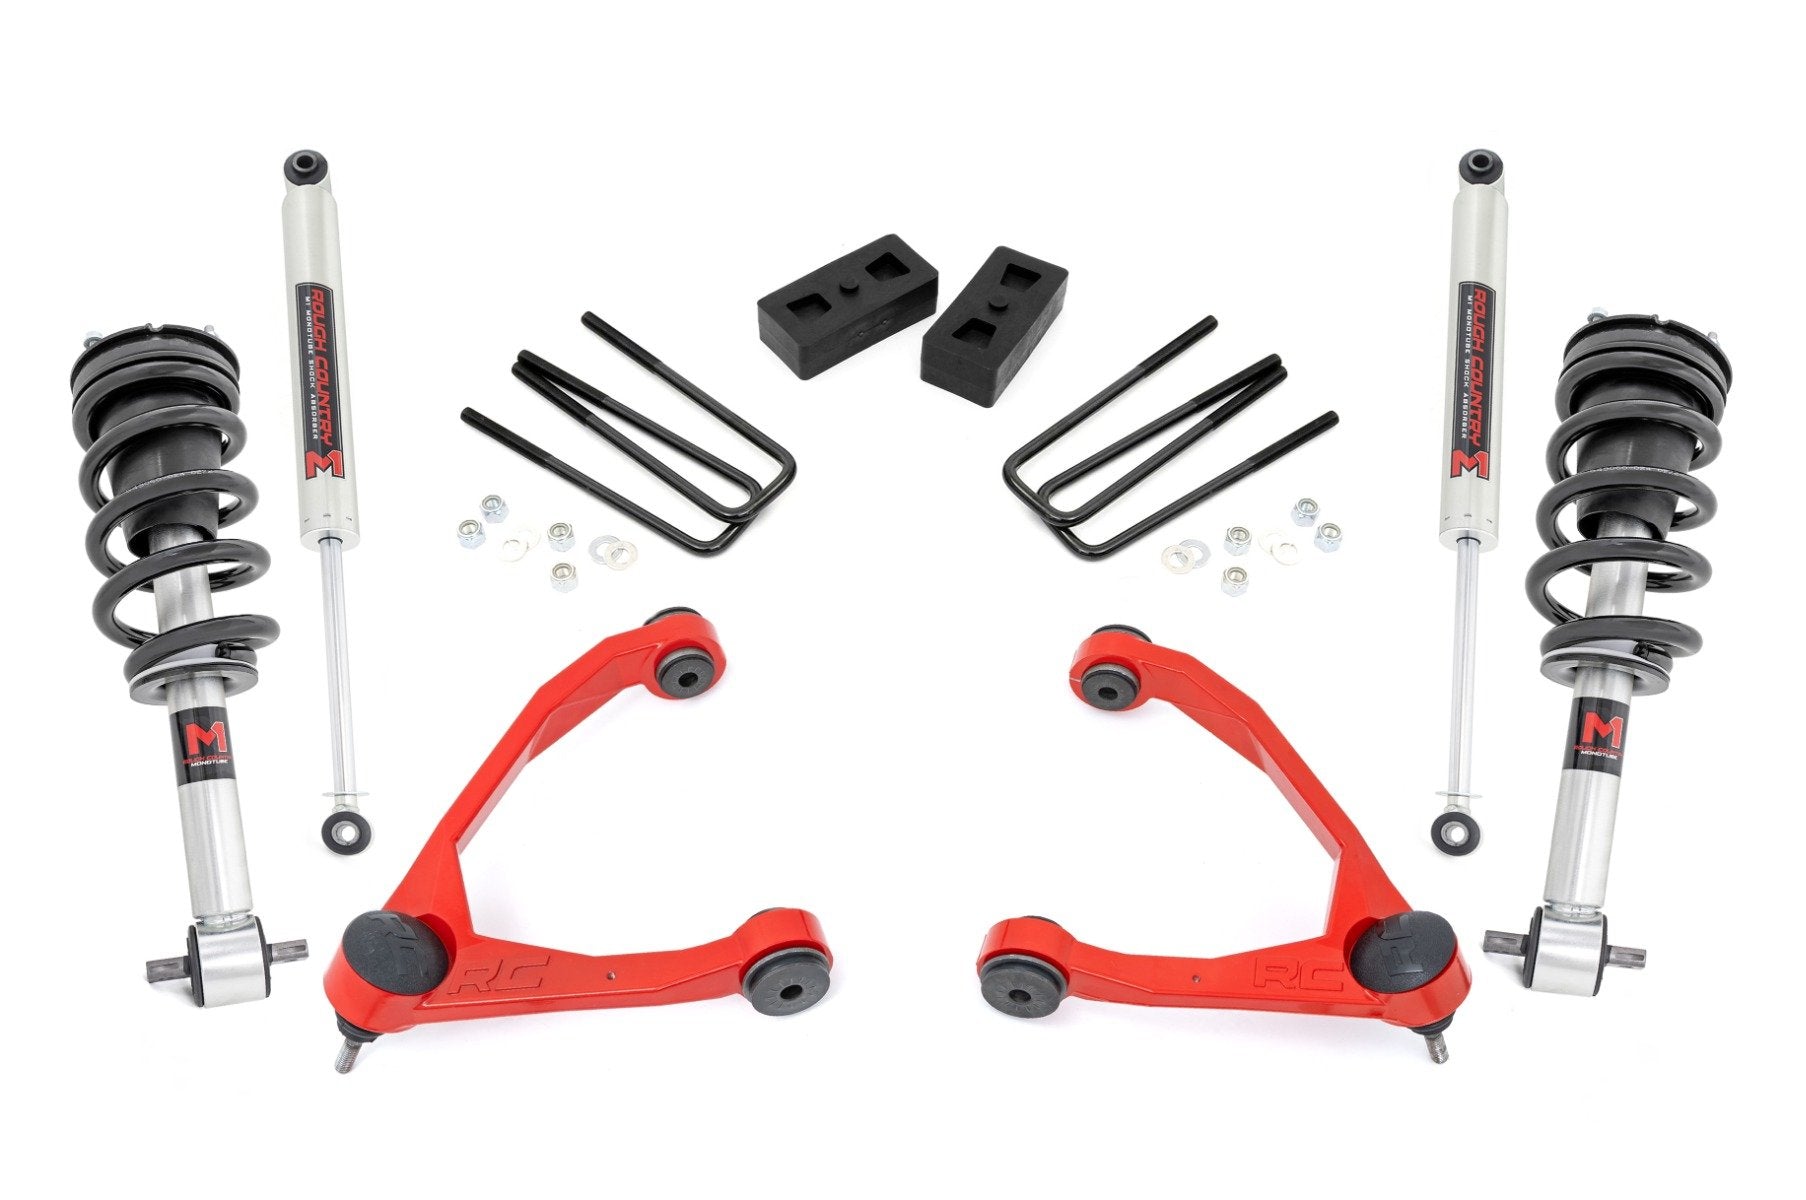 Rough Country 3.5 Inch Lift Kit | Cast Steel | M1 Strut | | Chevy/GMC 1500 (14-16)